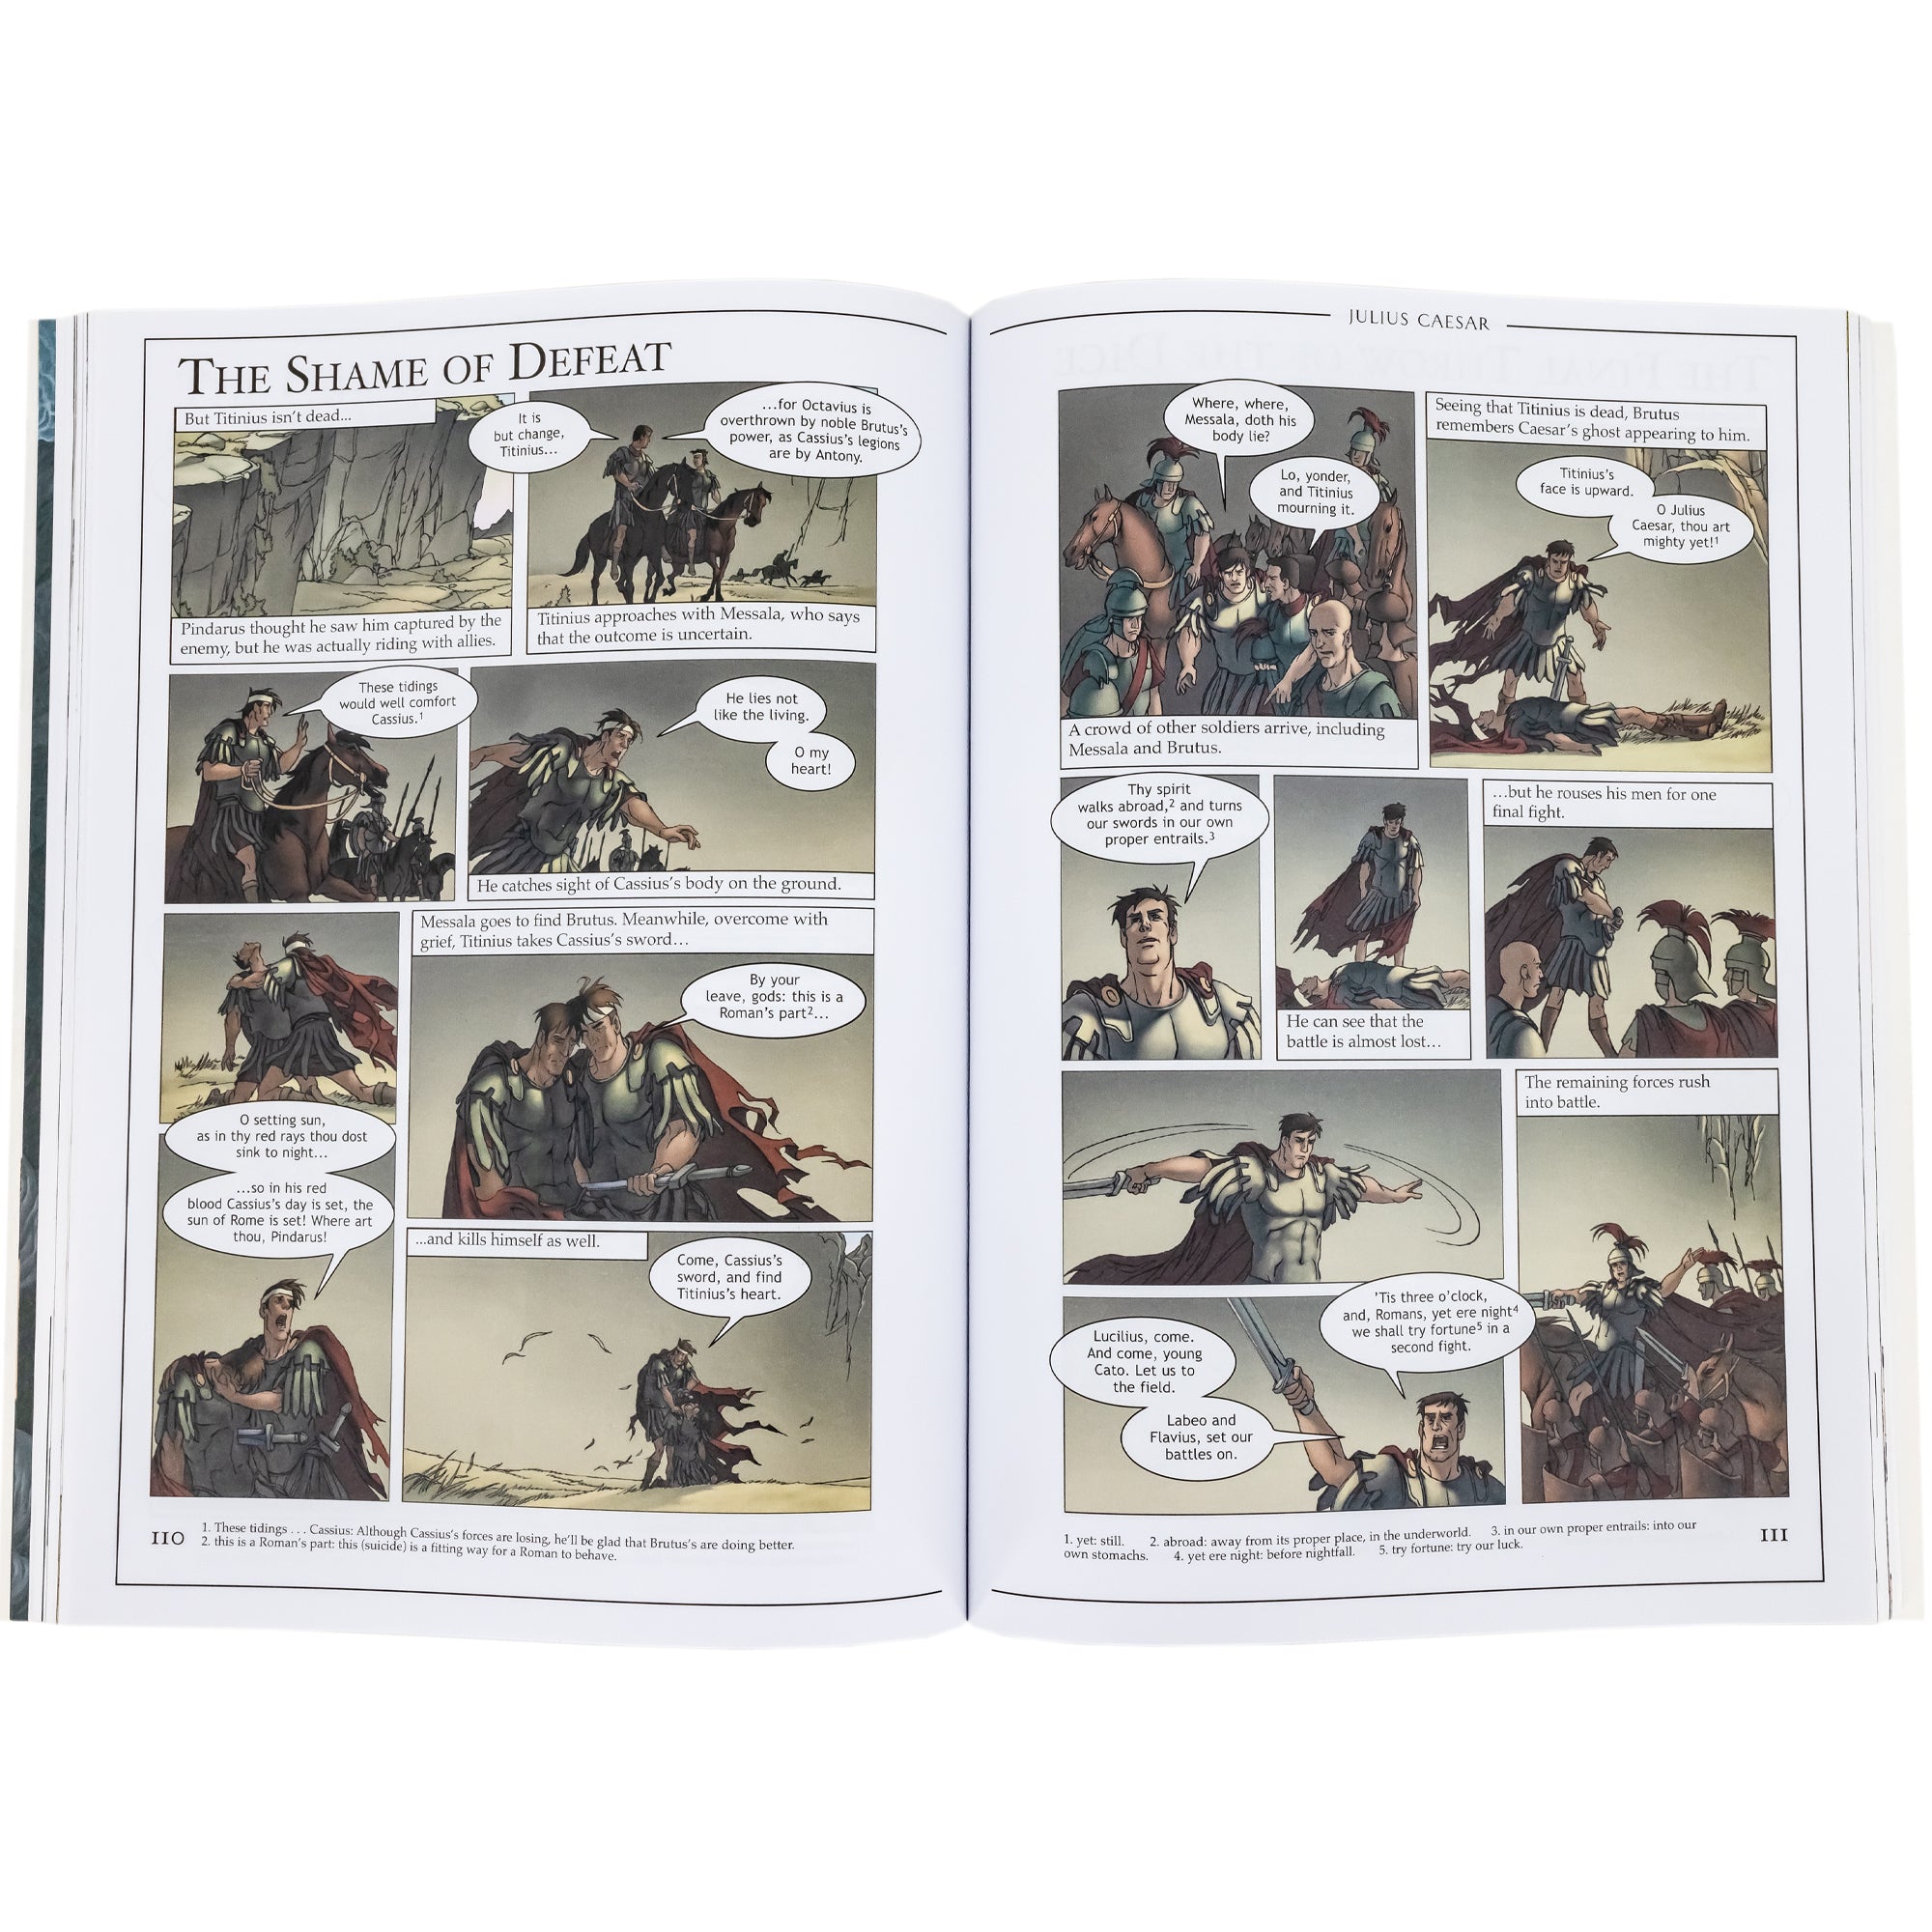 Graphic Shakespeare book open to show inside pages. The book is a comic book style layout with squared illustrations and talk bubbles. The pages are of a battle scene in Julius Caesar. The scene is titled “The Shame of Defeat.” The soldier Titinius finds the soldier Cassius dead and uses Cassius’ sword to kill himself. The other solders prepare for a final battle.